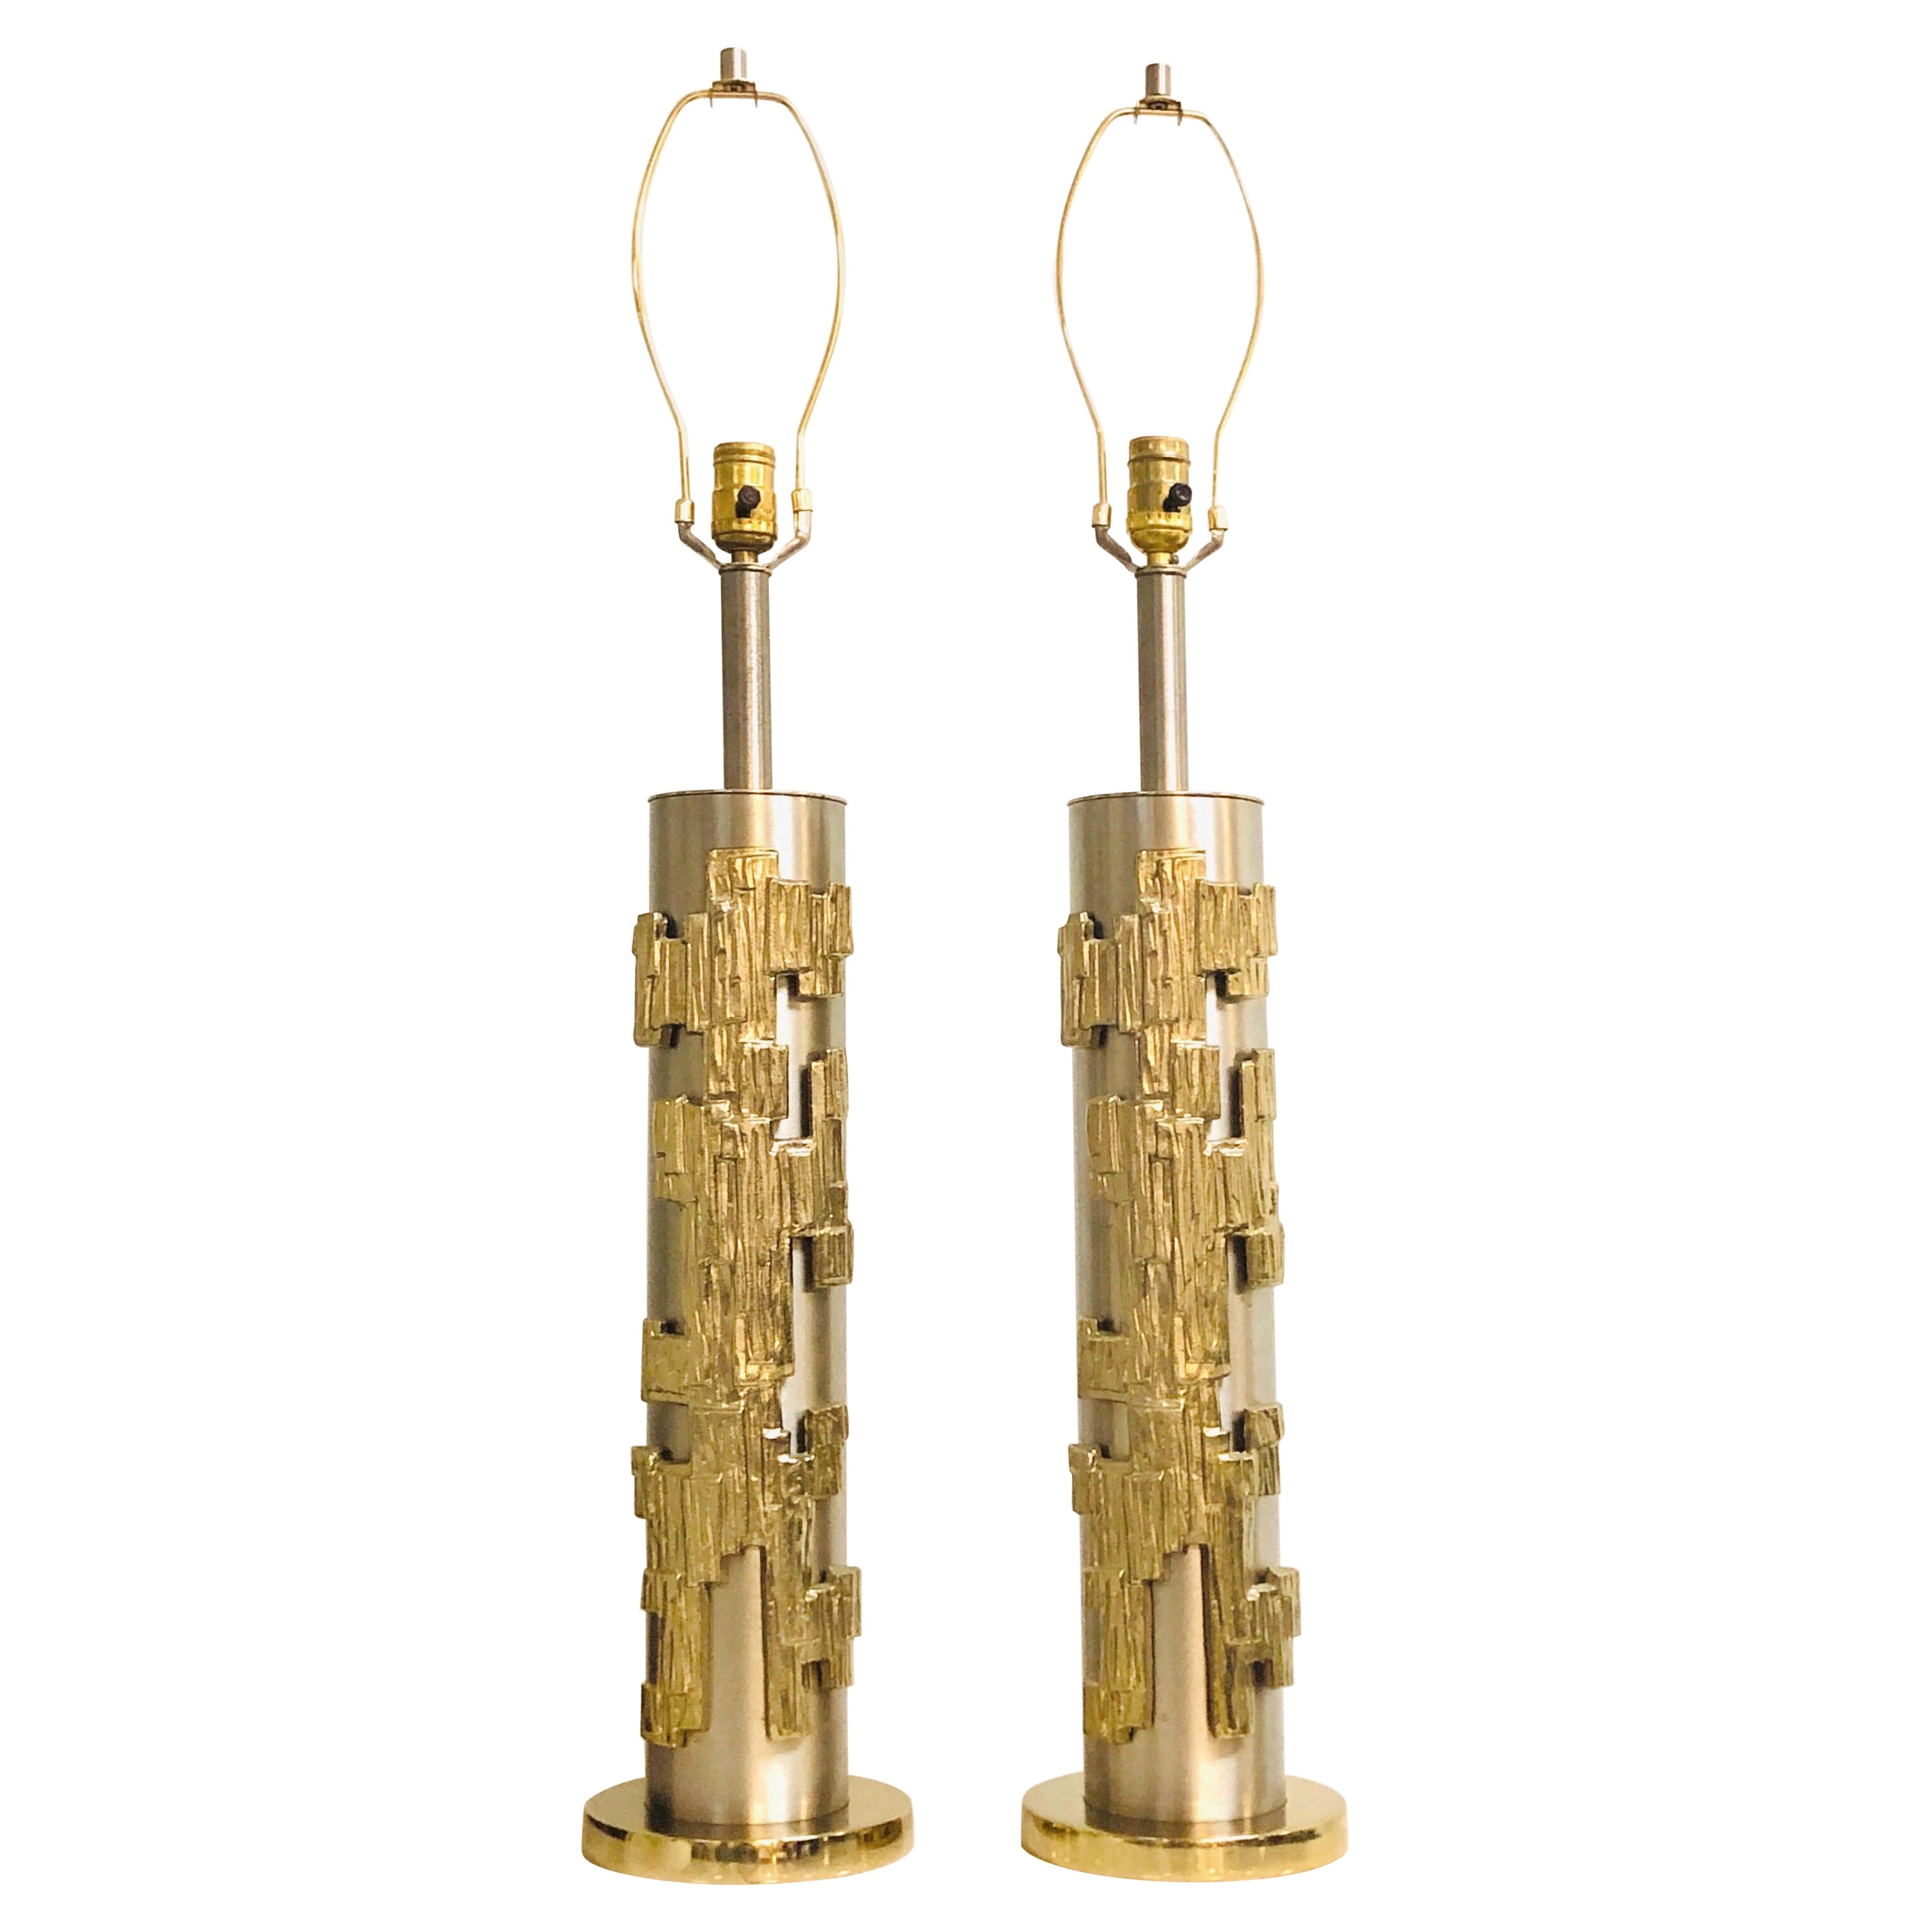 Pair of Sculptural Table Lamps Brushed Nickel and Brass by Laurel